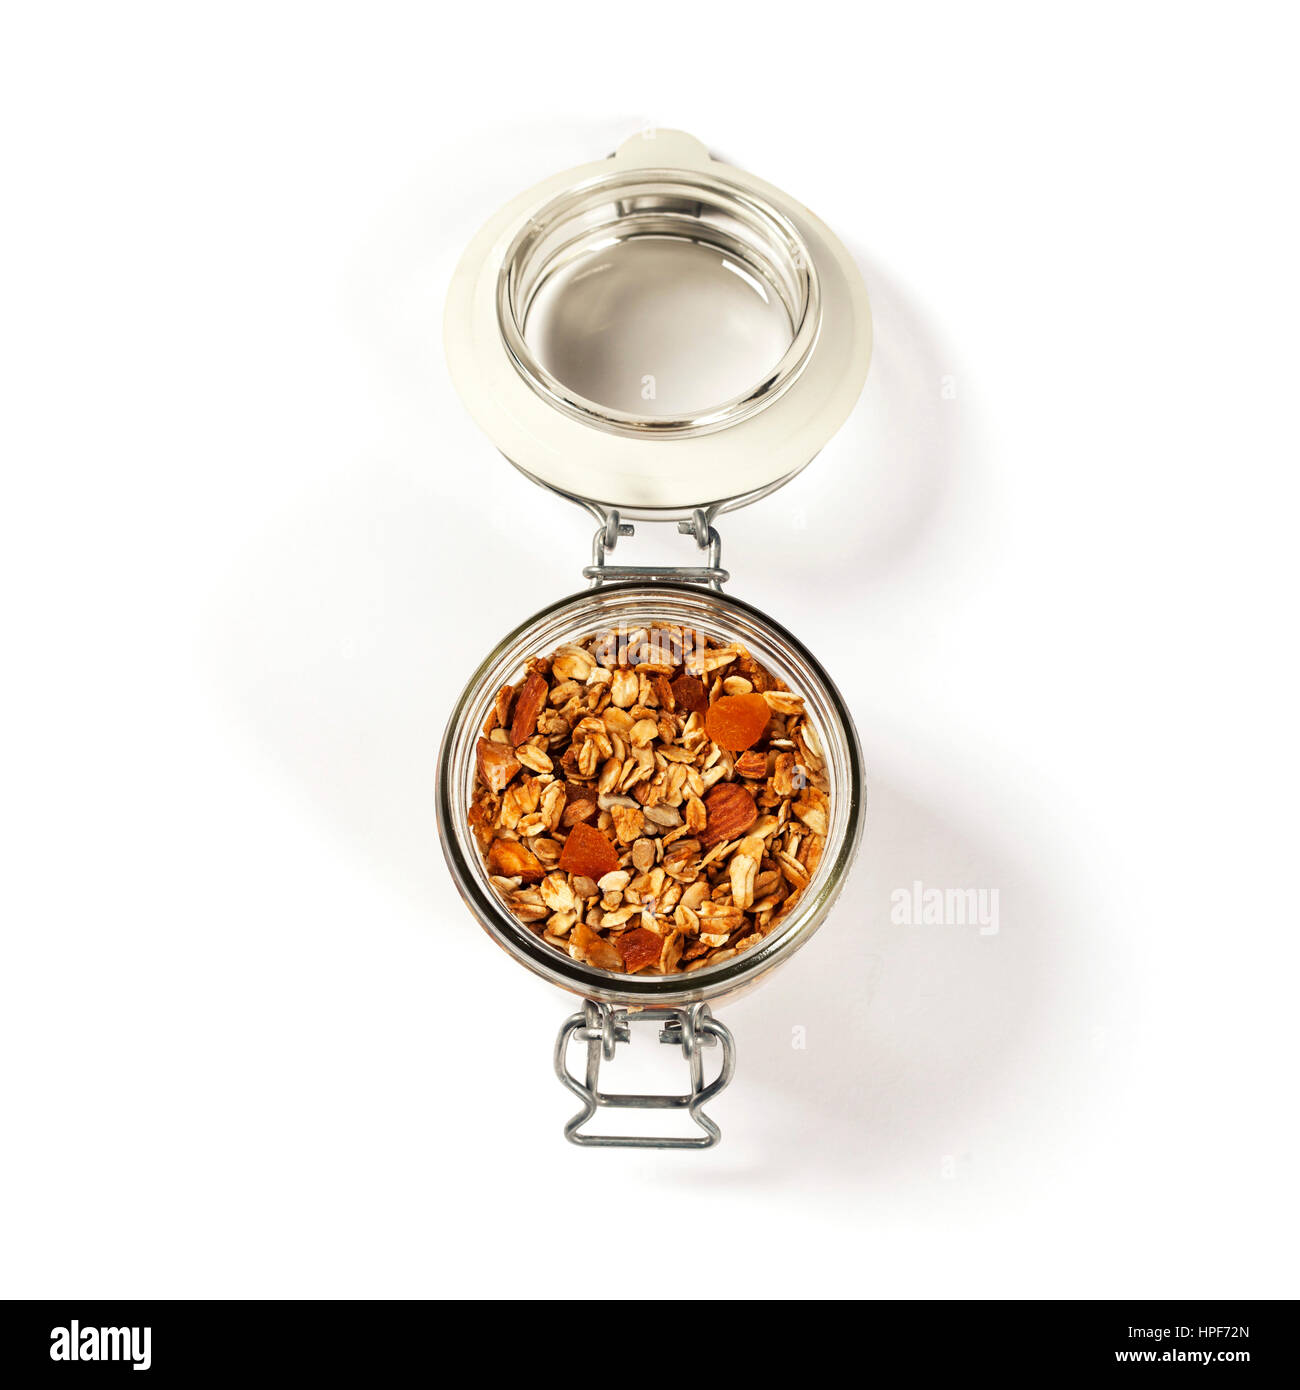 Homemade oatmeal granola with fruits and nuts in a glass jar on white background Stock Photo